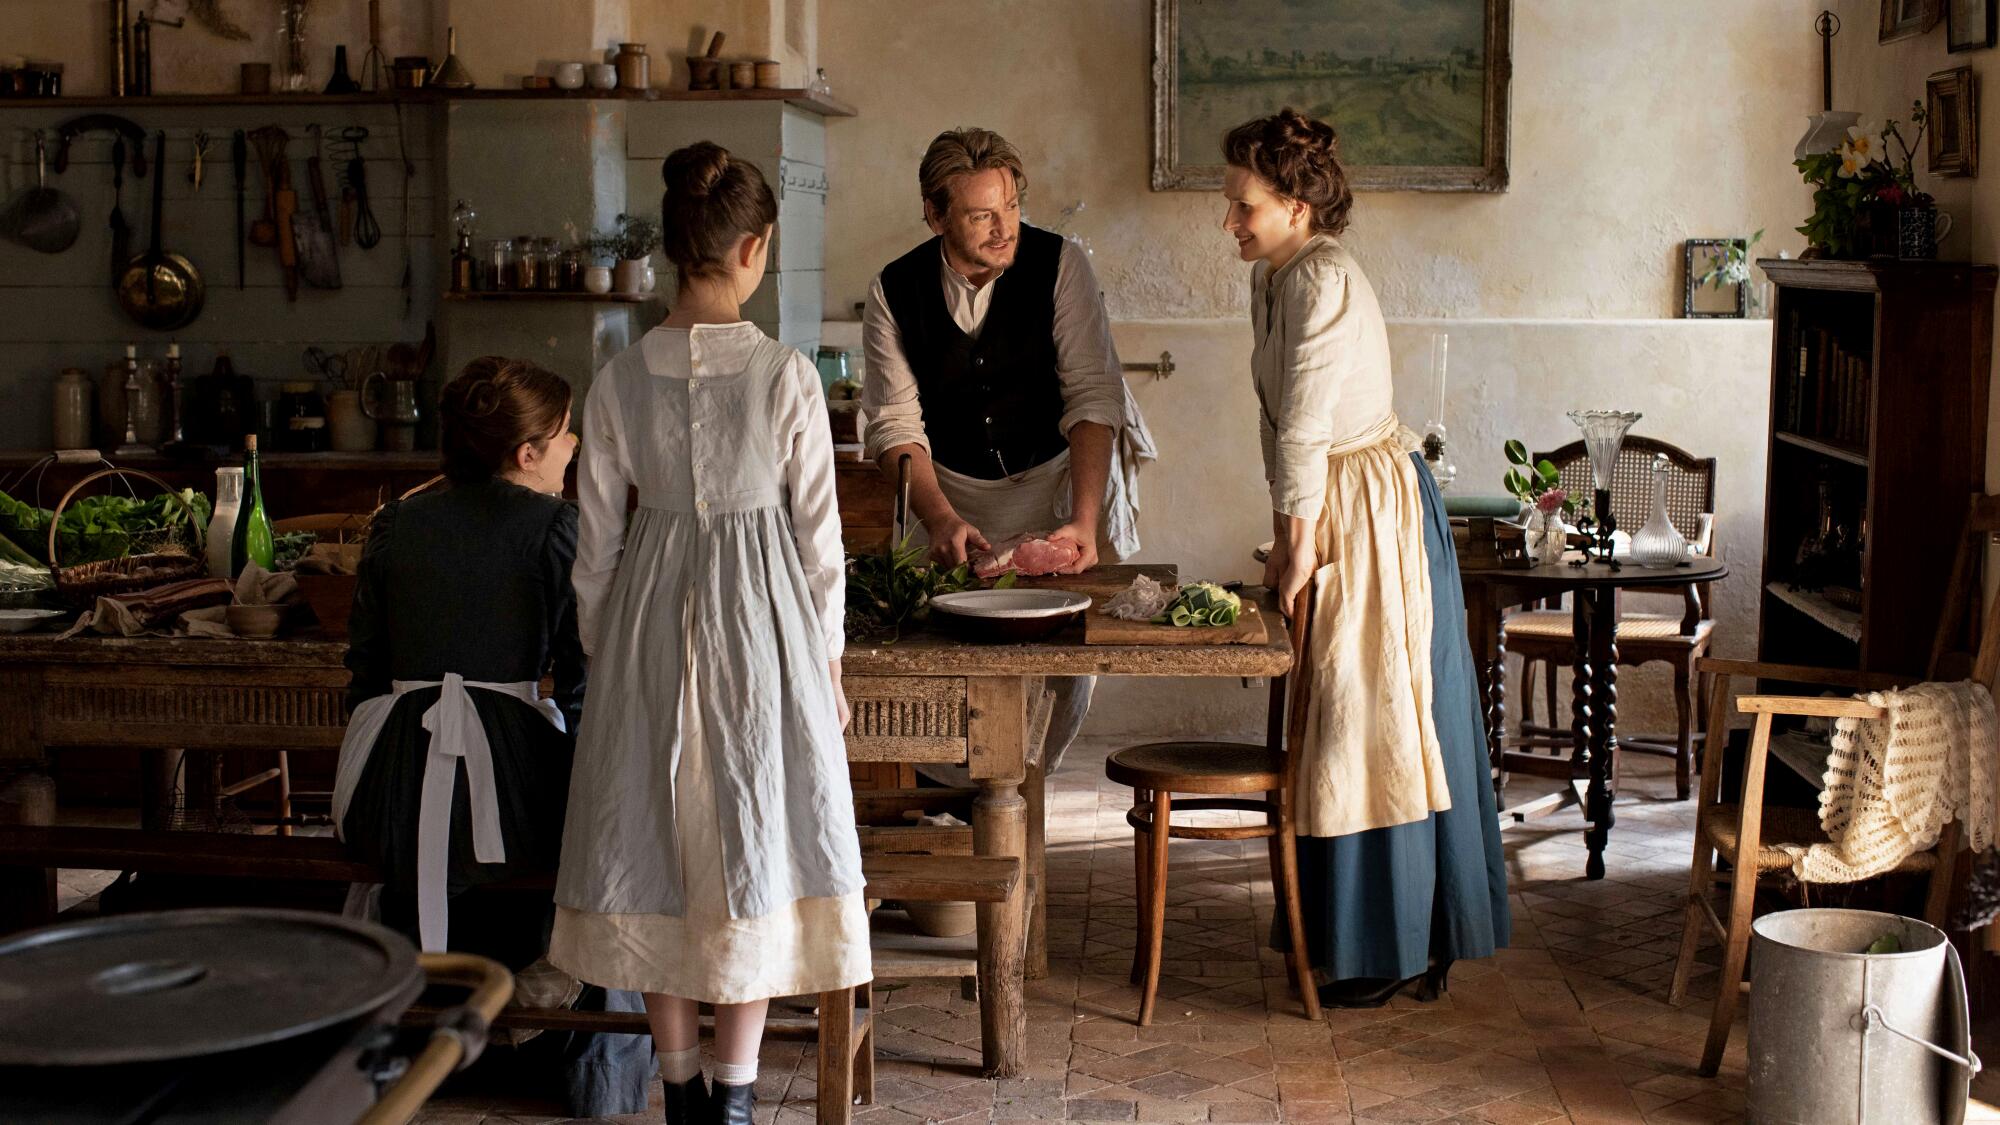 A woman and a man cook together in a kitchen, with helpers.